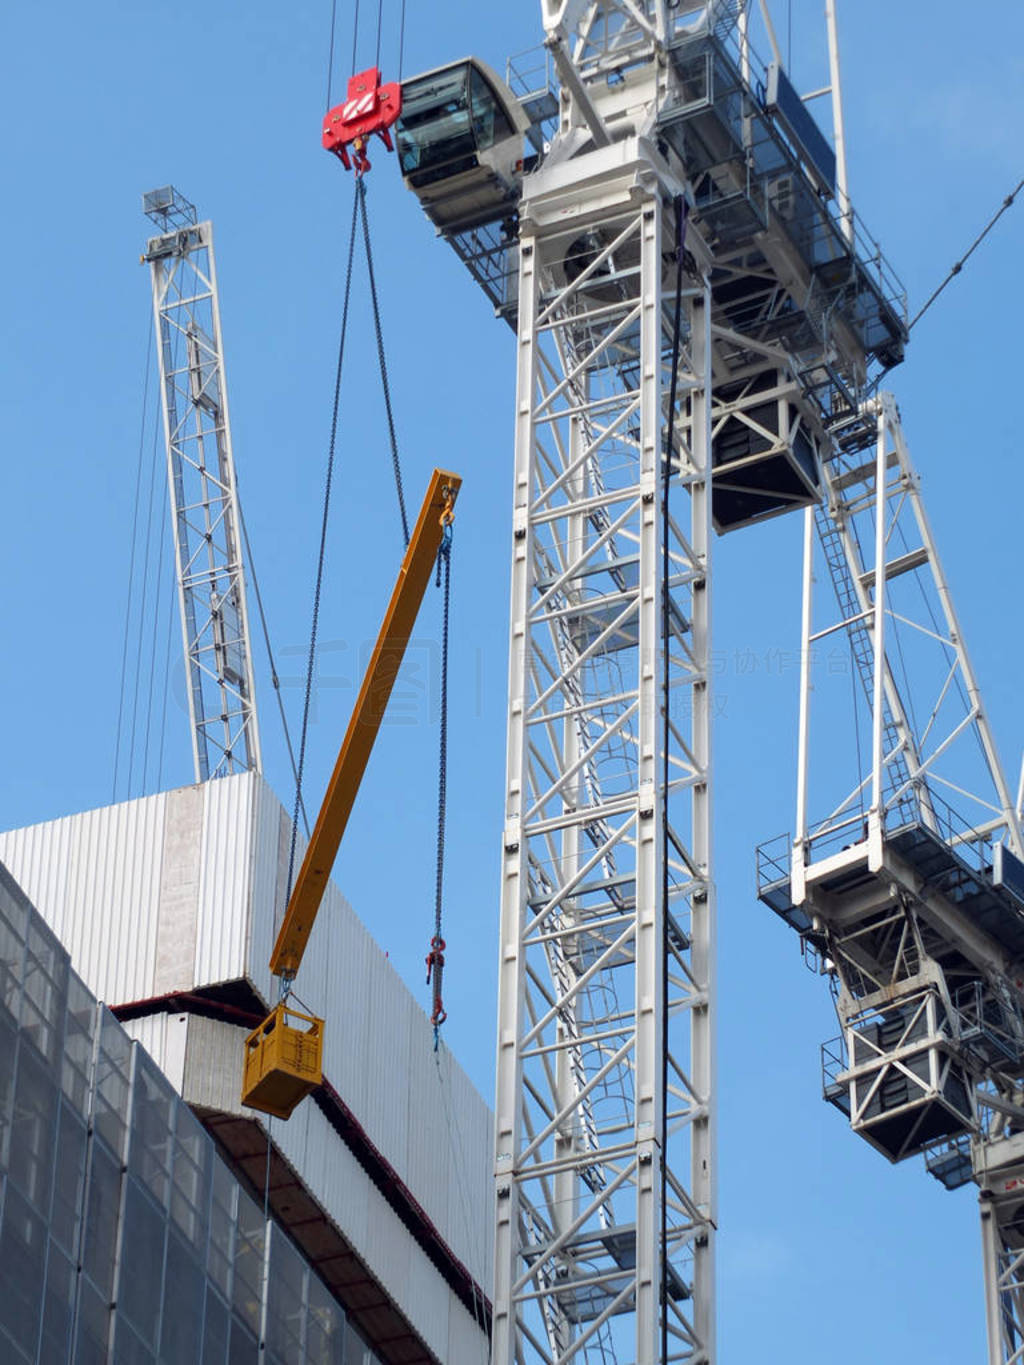 detail of a large construction crane lifting a large metal beam